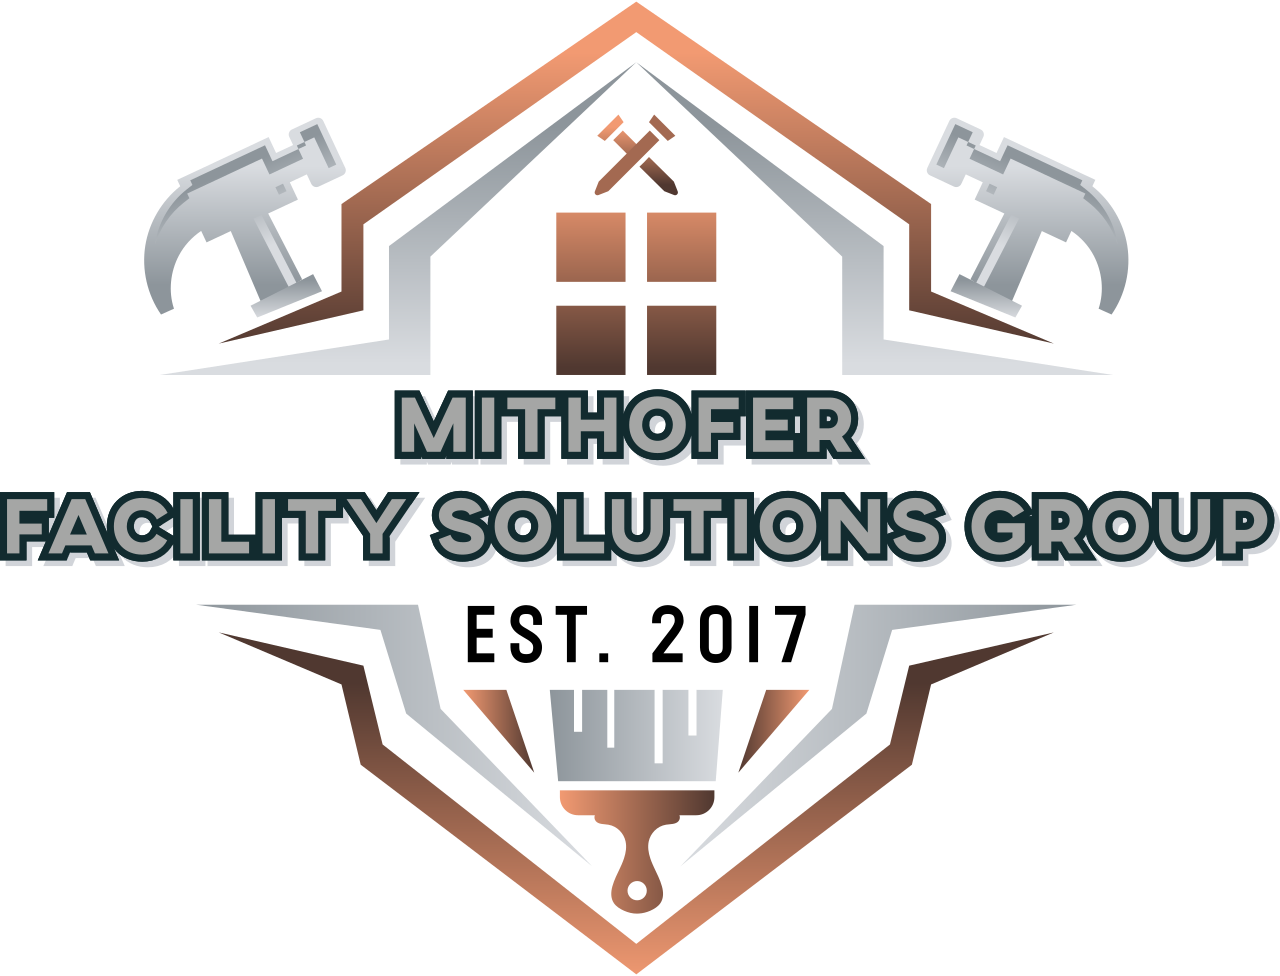 Mithofer 
Facility Solutions Group's logo